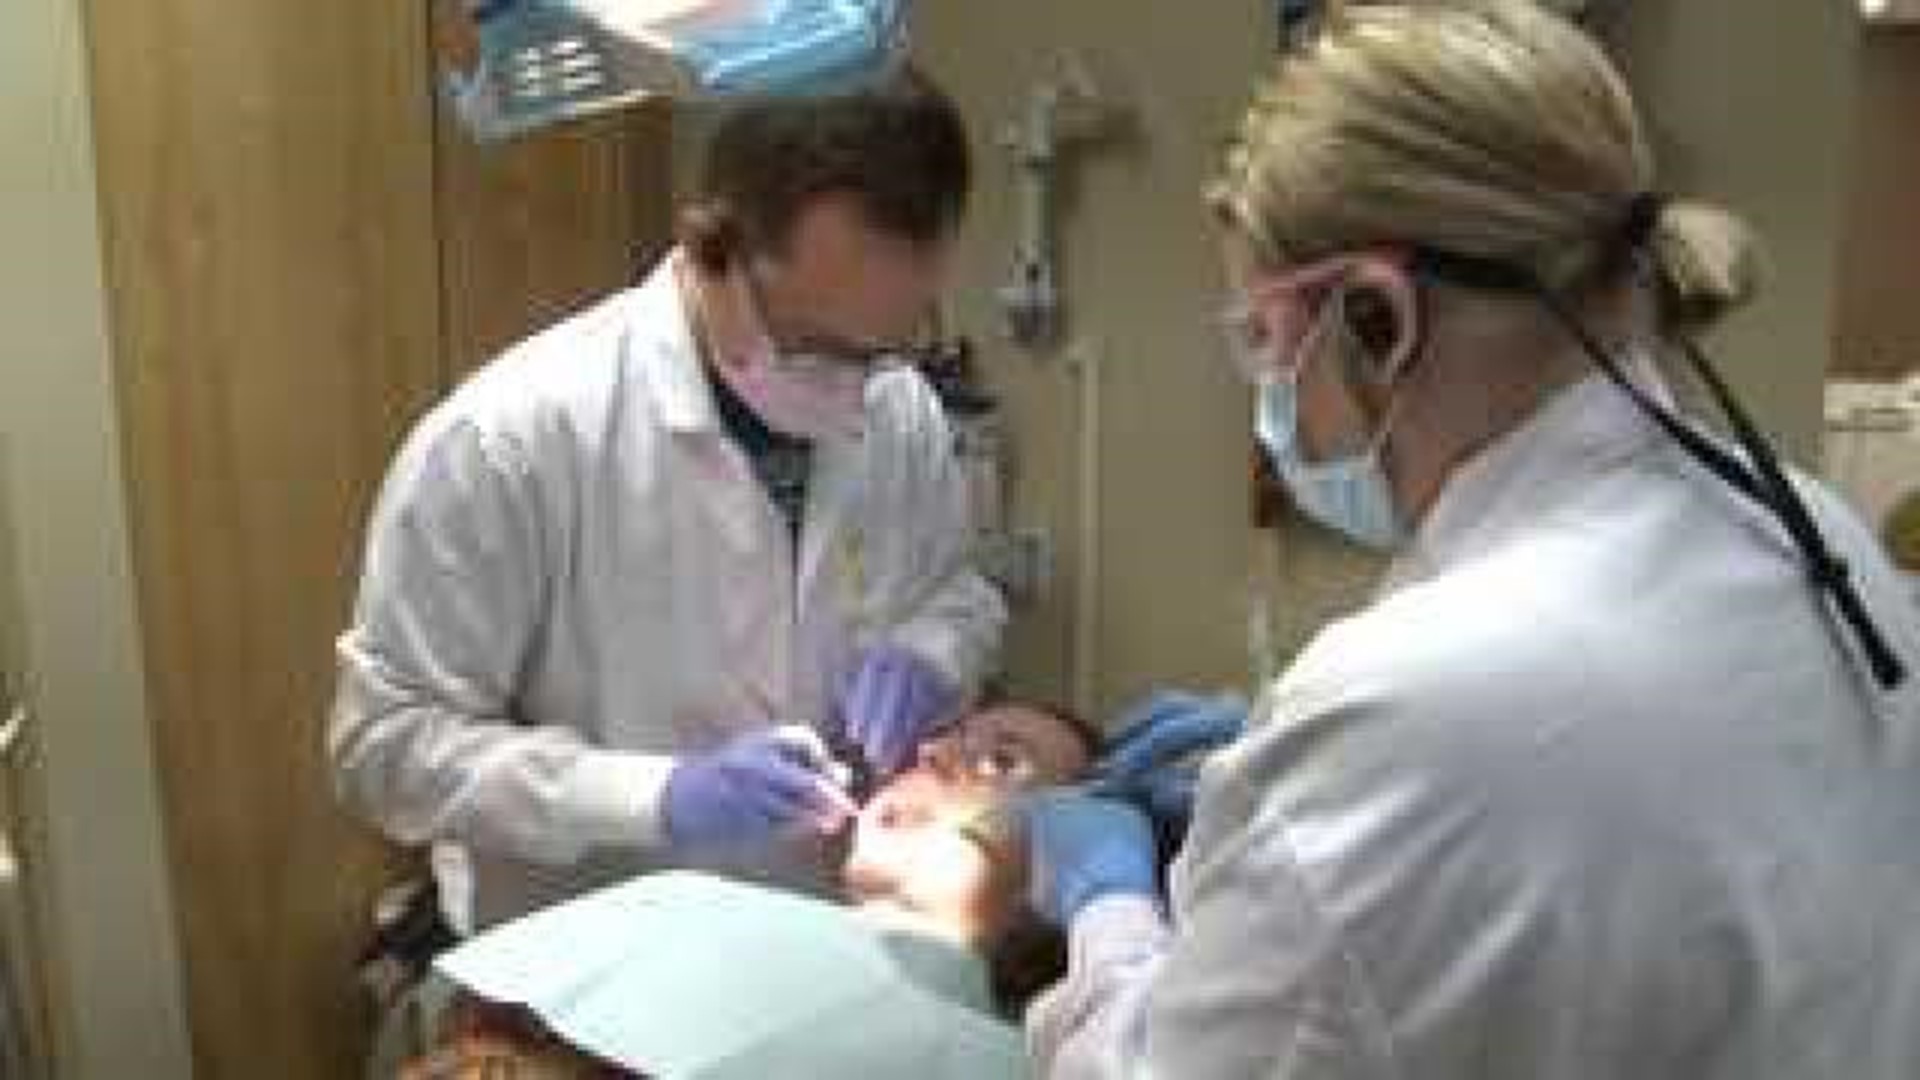 Free Dentistry Day serves patients with care and compassion